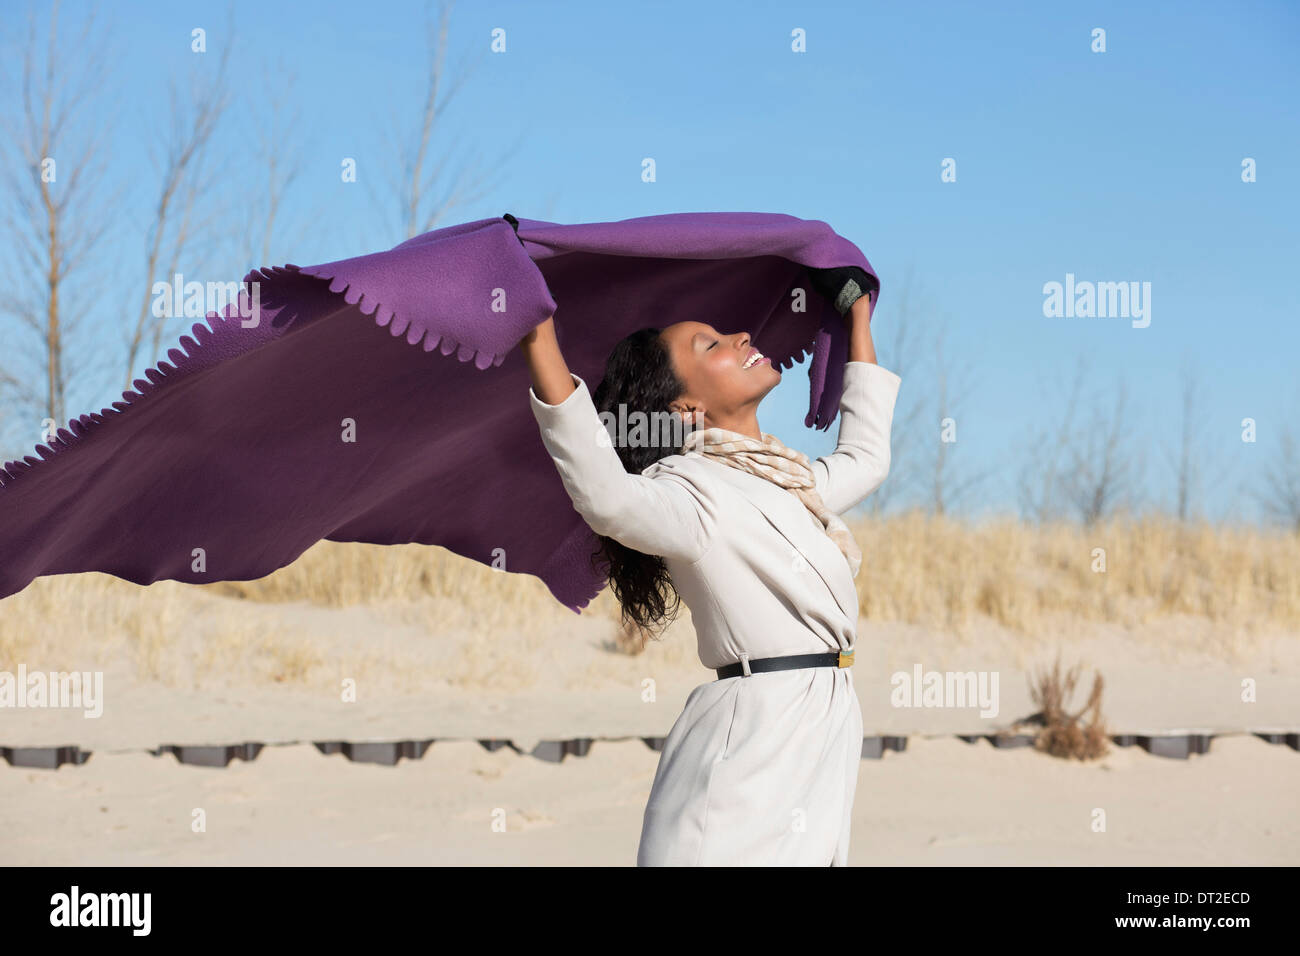 USA, Illinois, Waukegan, Young woman holding blanket above her head Stock Photo